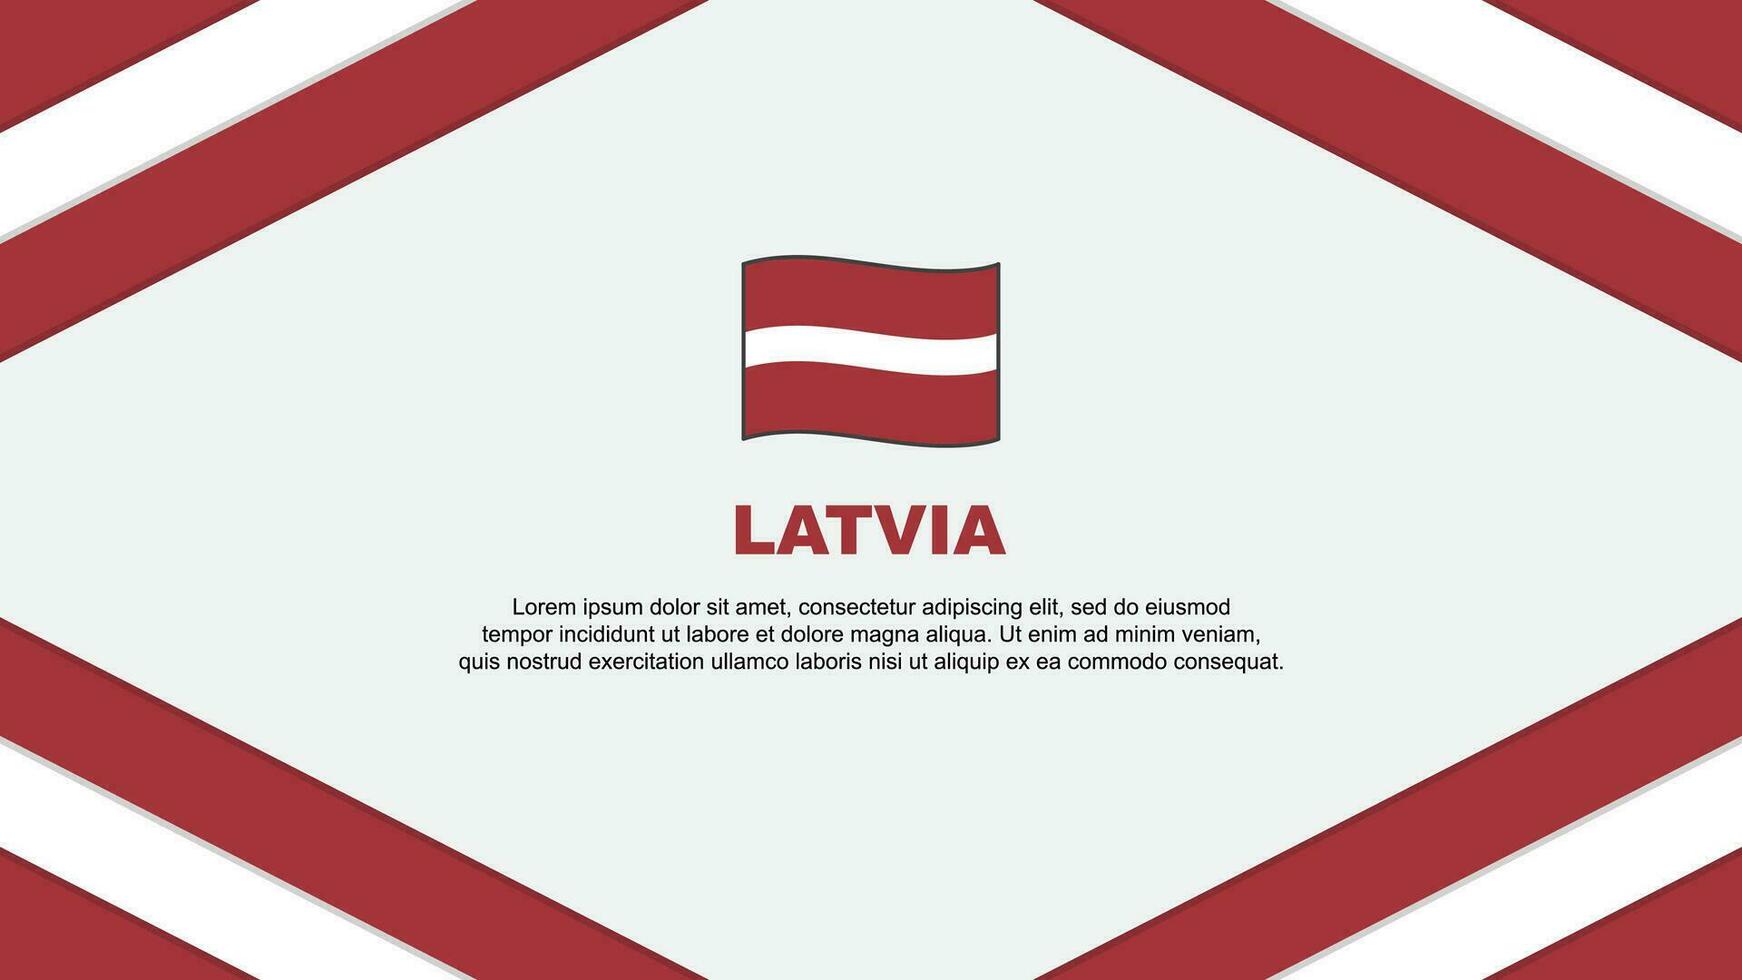 Latvia Flag Abstract Background Design Template. Latvia Independence Day Banner Cartoon Vector Illustration. Latvia Template